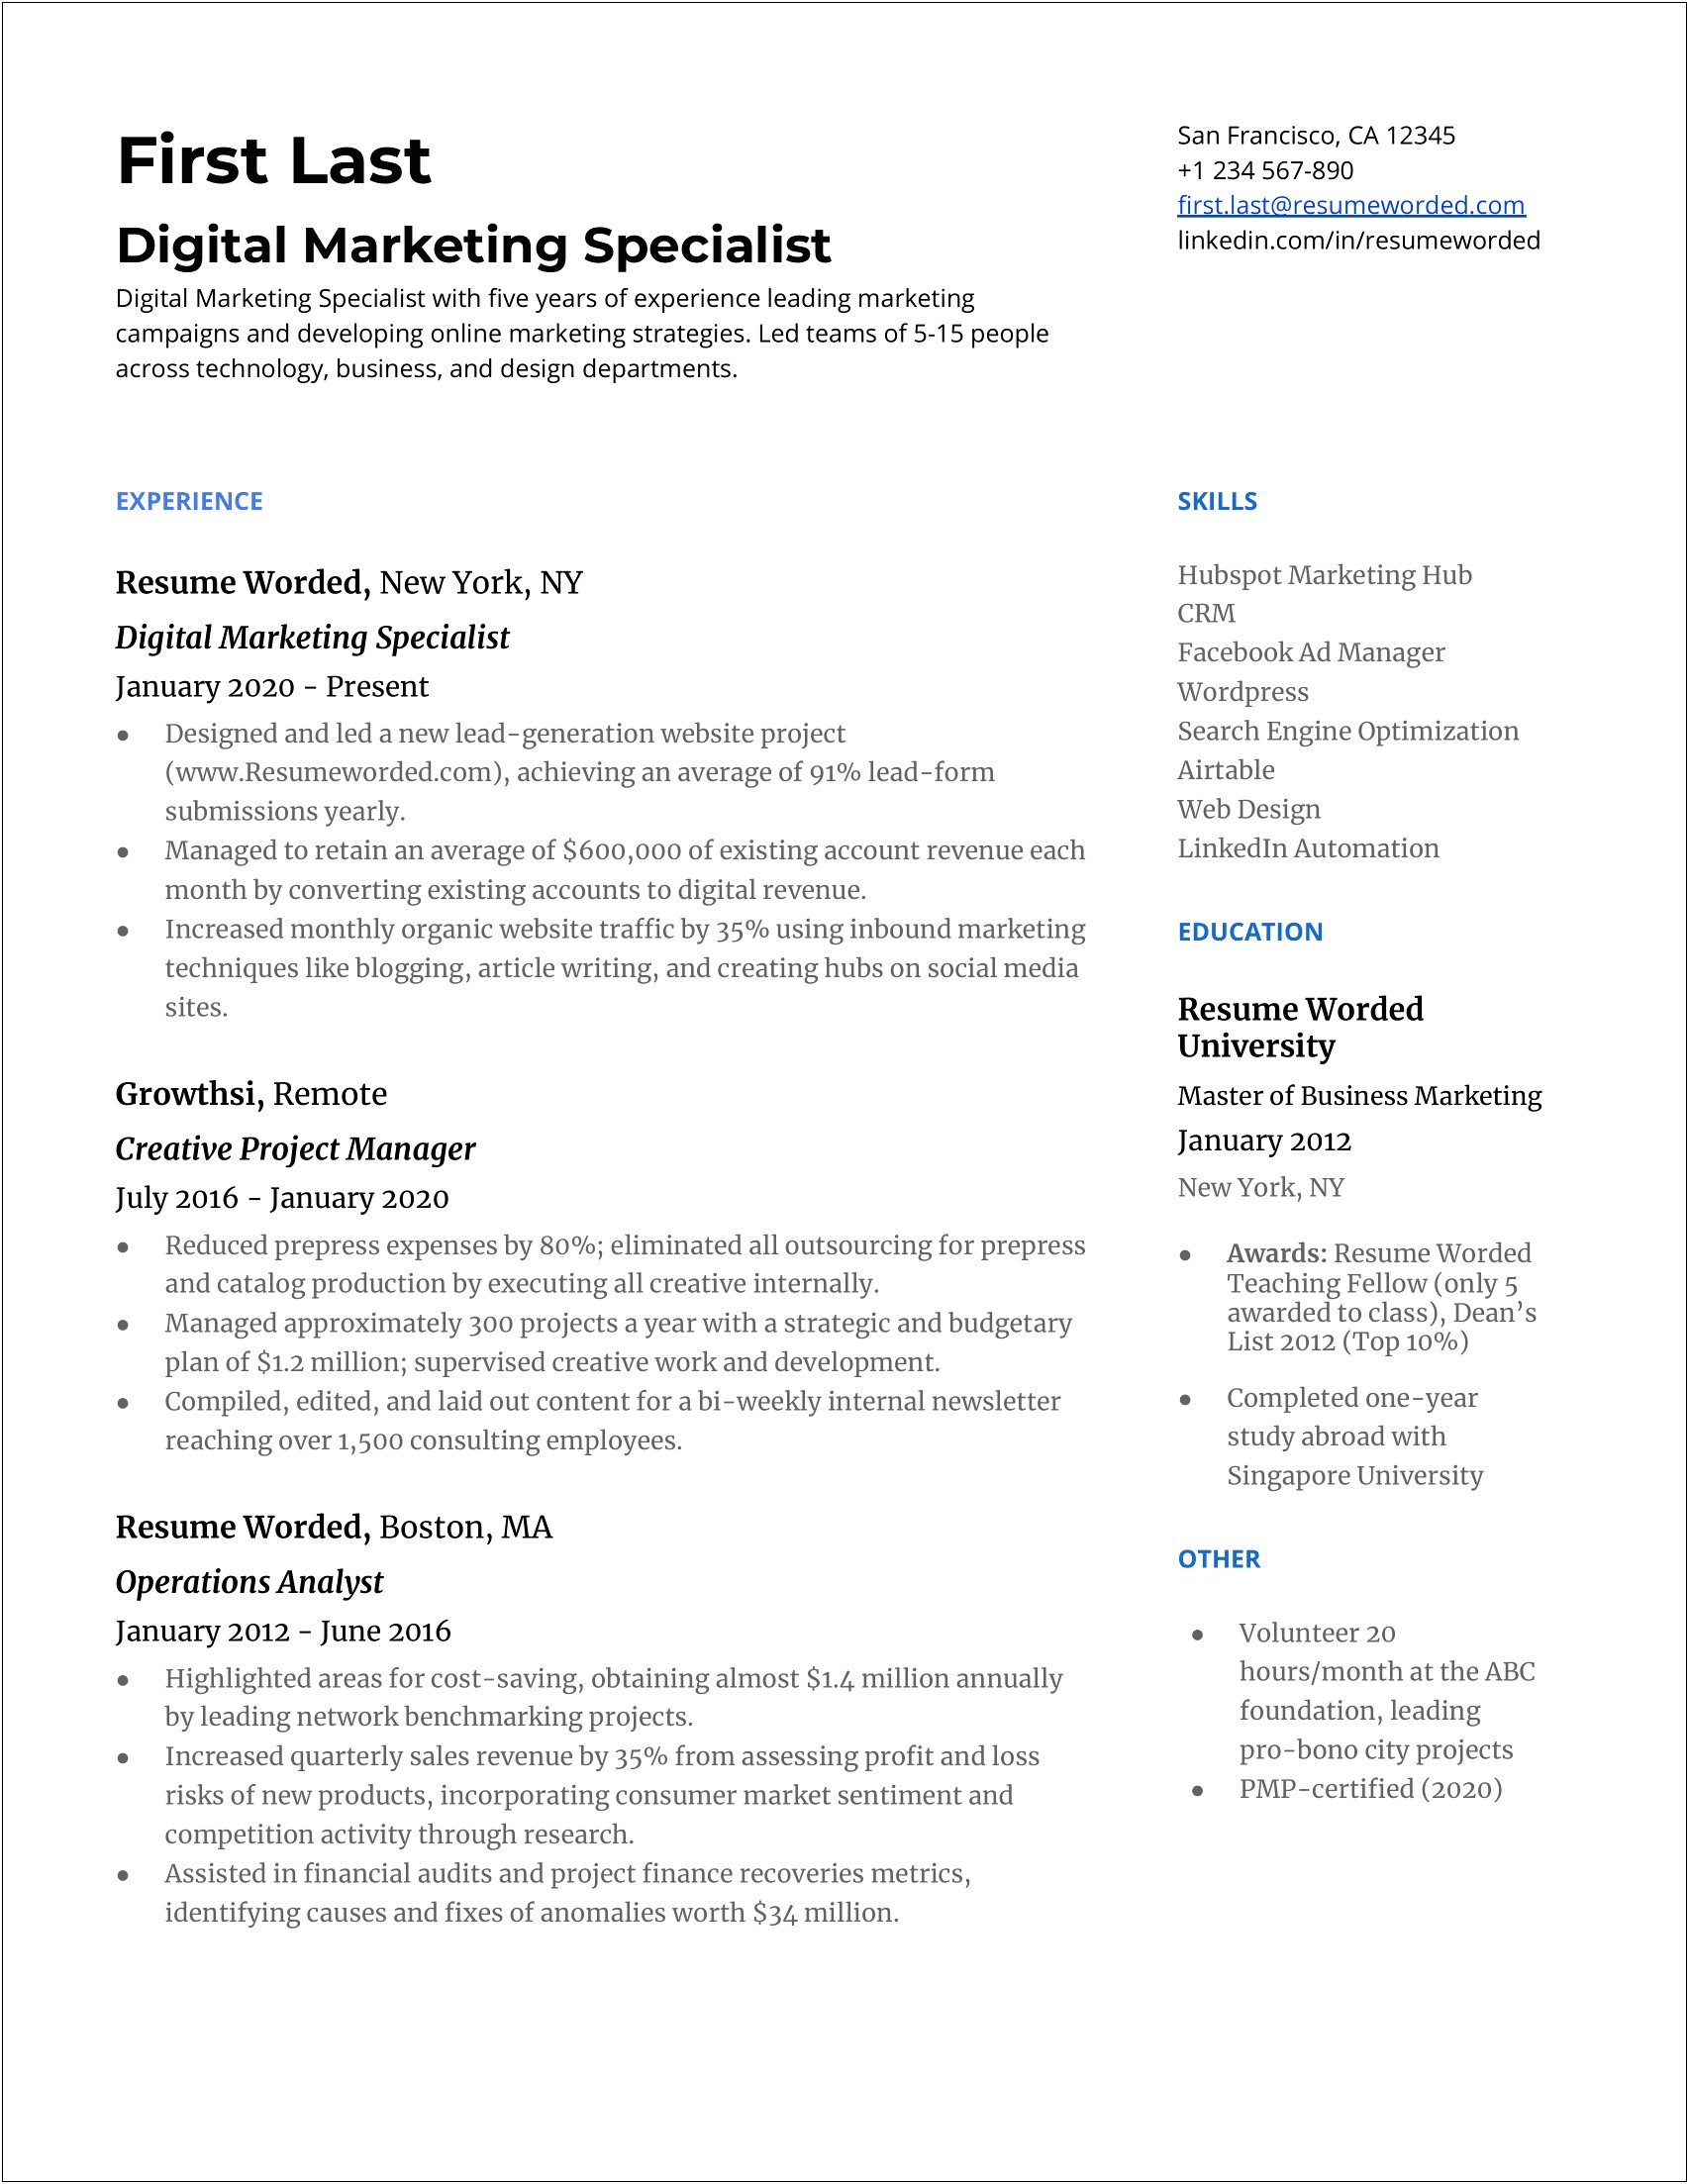 Website To Search Skills For Resume